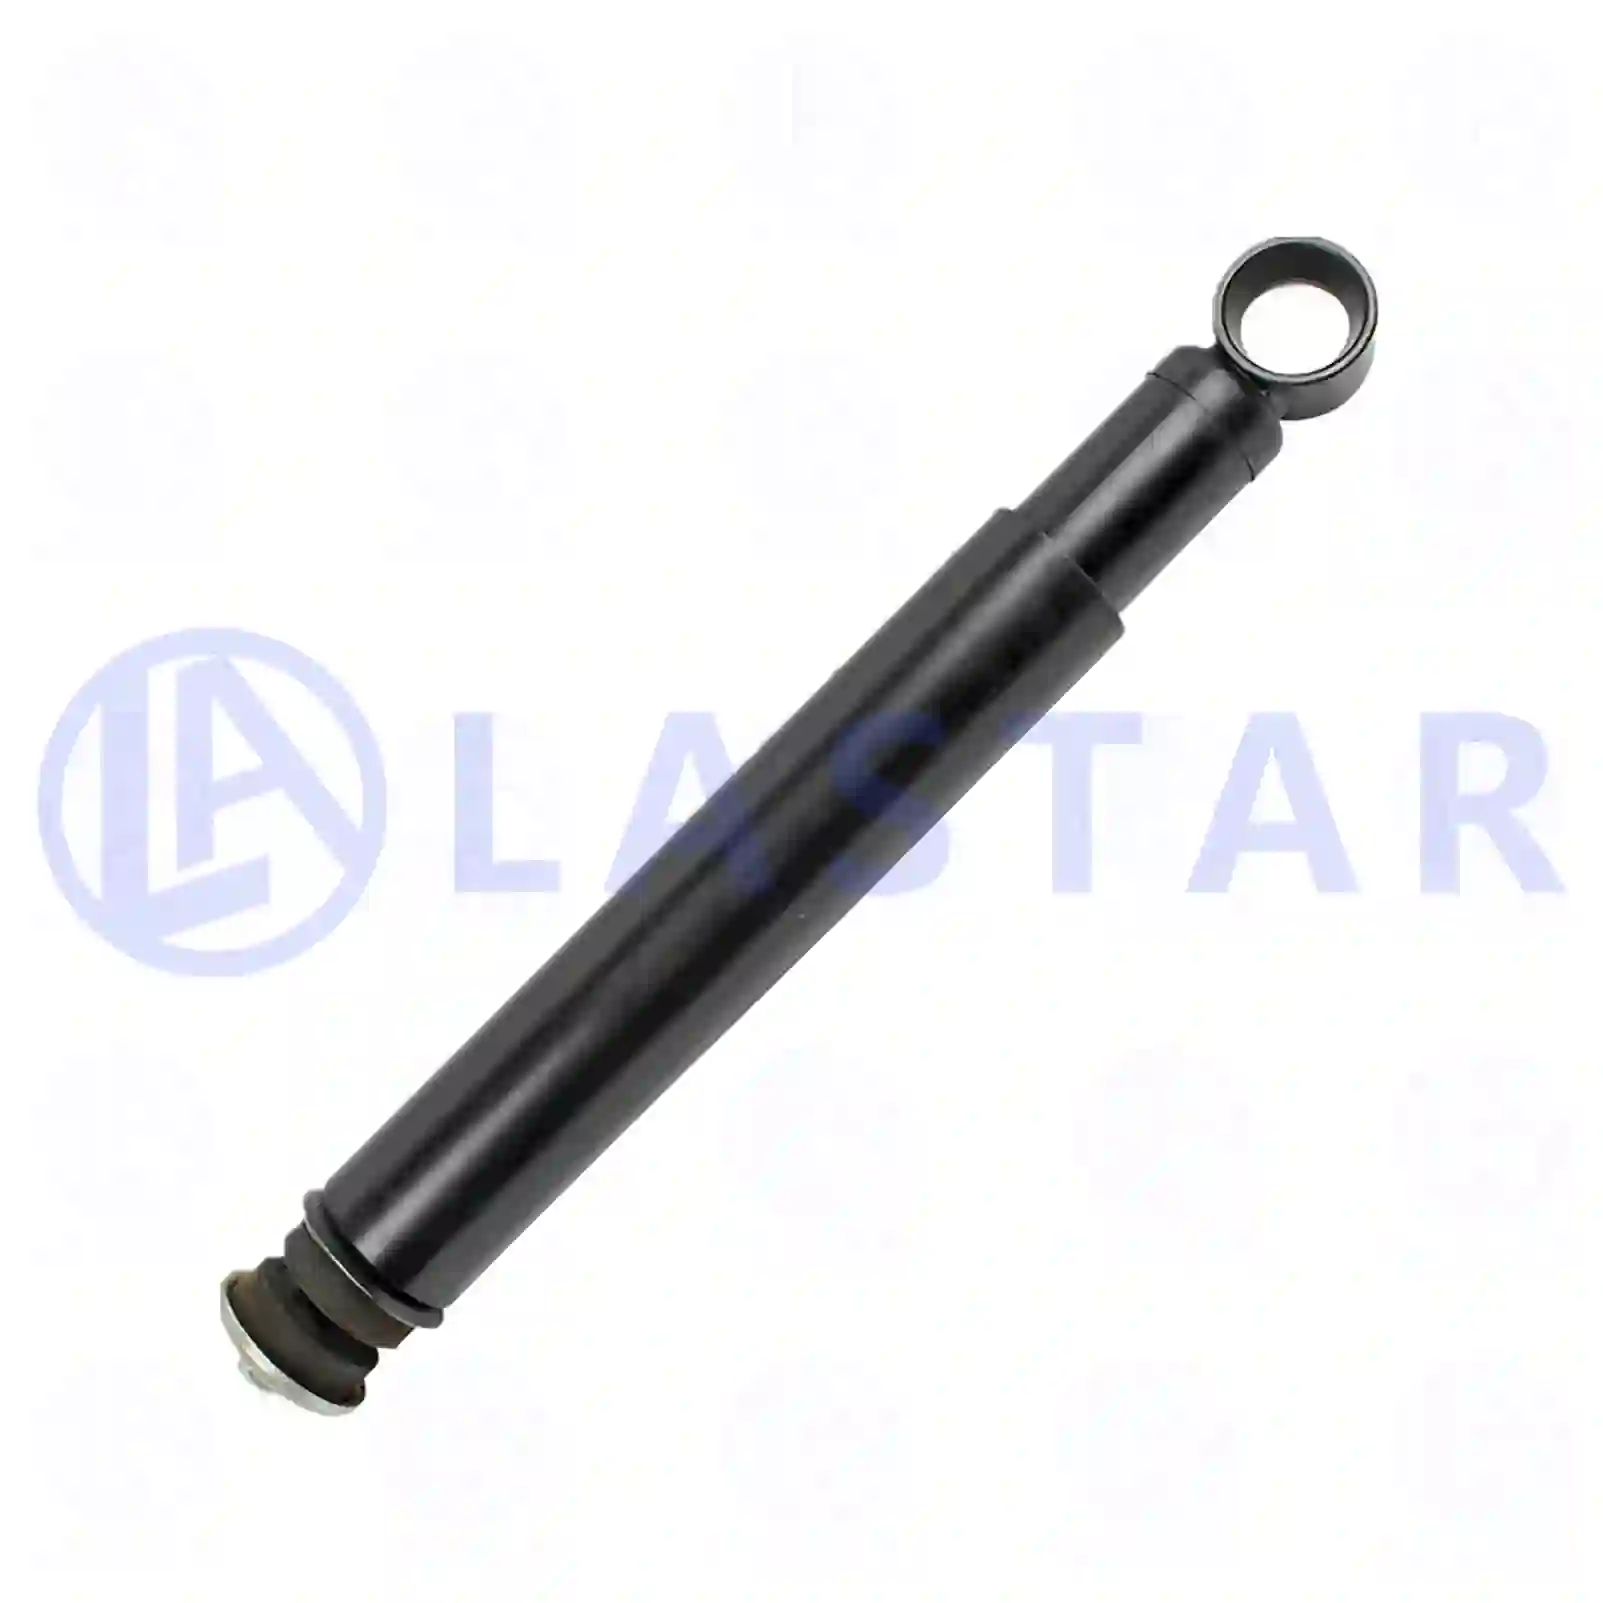 Shock absorber, 77730056, 1307332, 1323476, 1377056, 1379487, 1478502, ZG41509-0008, ||  77730056 Lastar Spare Part | Truck Spare Parts, Auotomotive Spare Parts Shock absorber, 77730056, 1307332, 1323476, 1377056, 1379487, 1478502, ZG41509-0008, ||  77730056 Lastar Spare Part | Truck Spare Parts, Auotomotive Spare Parts